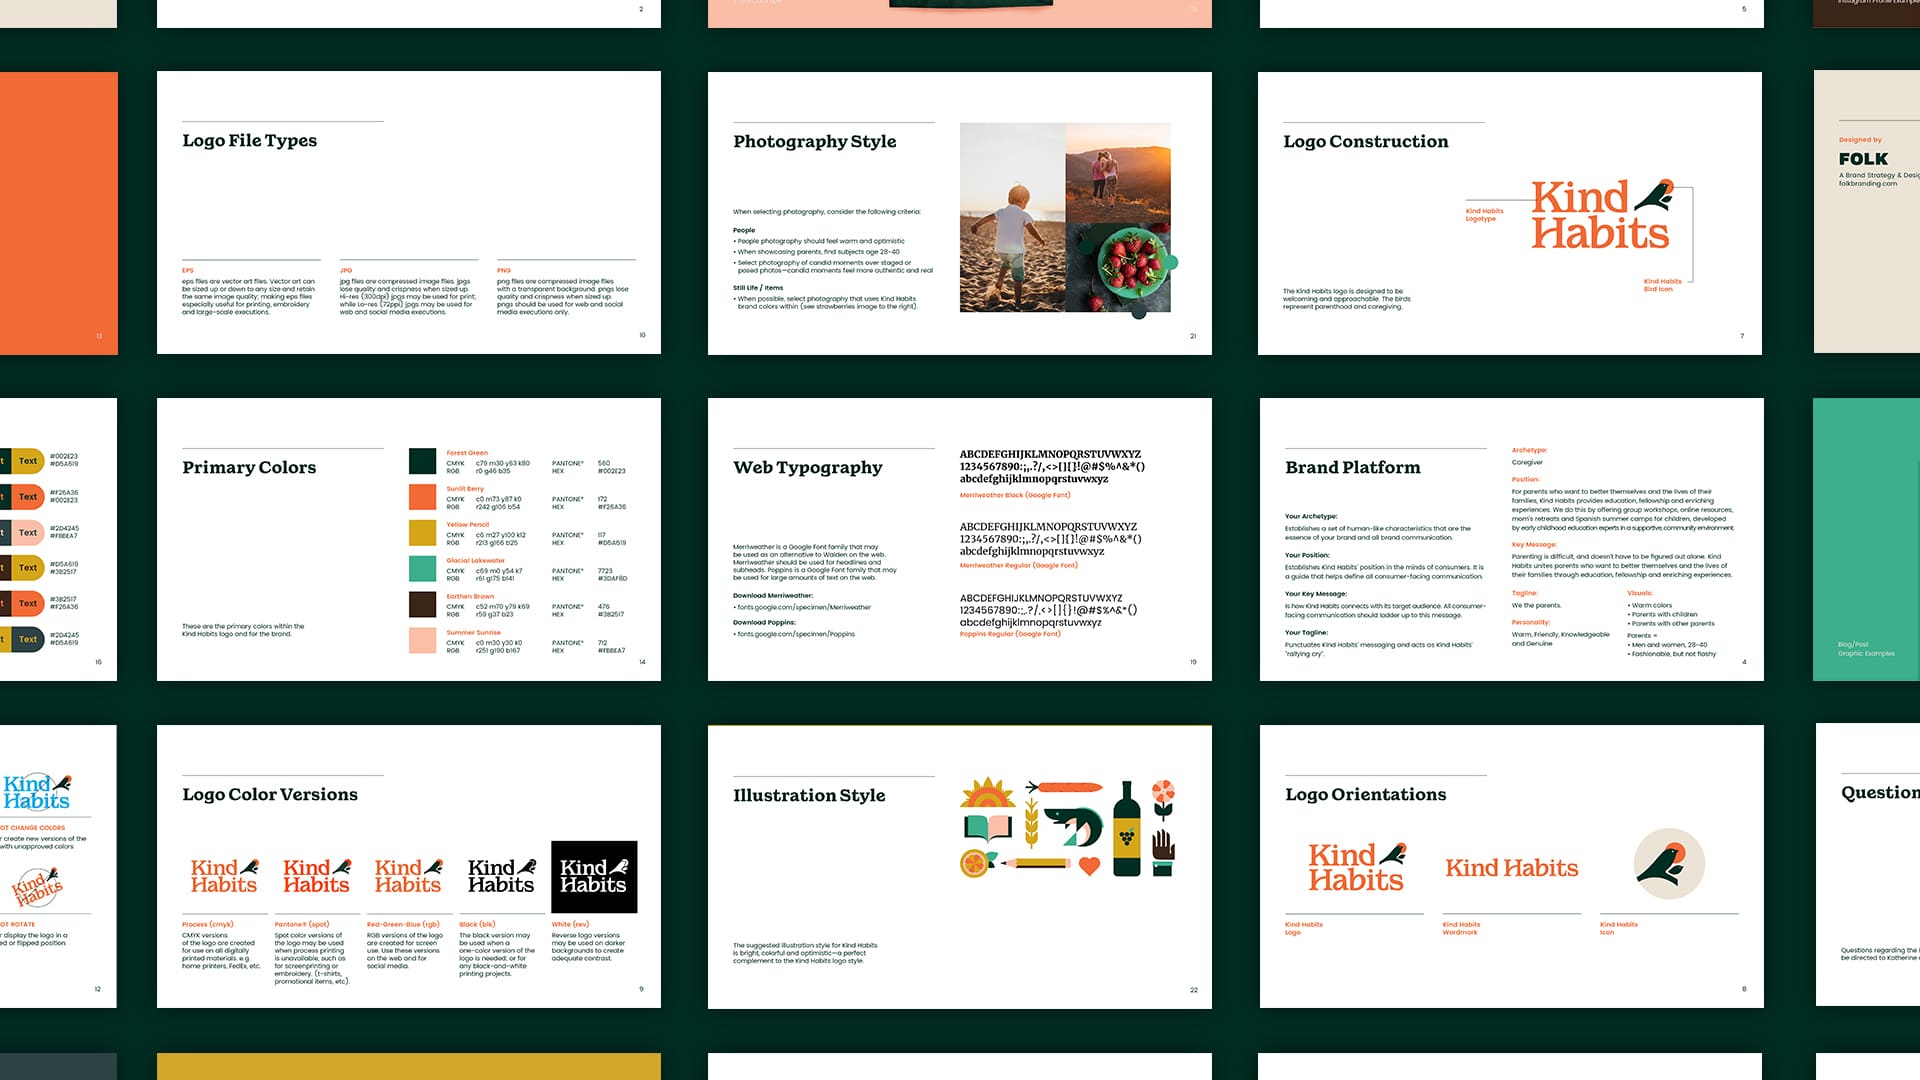 Image showing pages from the Kind Habits brand guidelines.